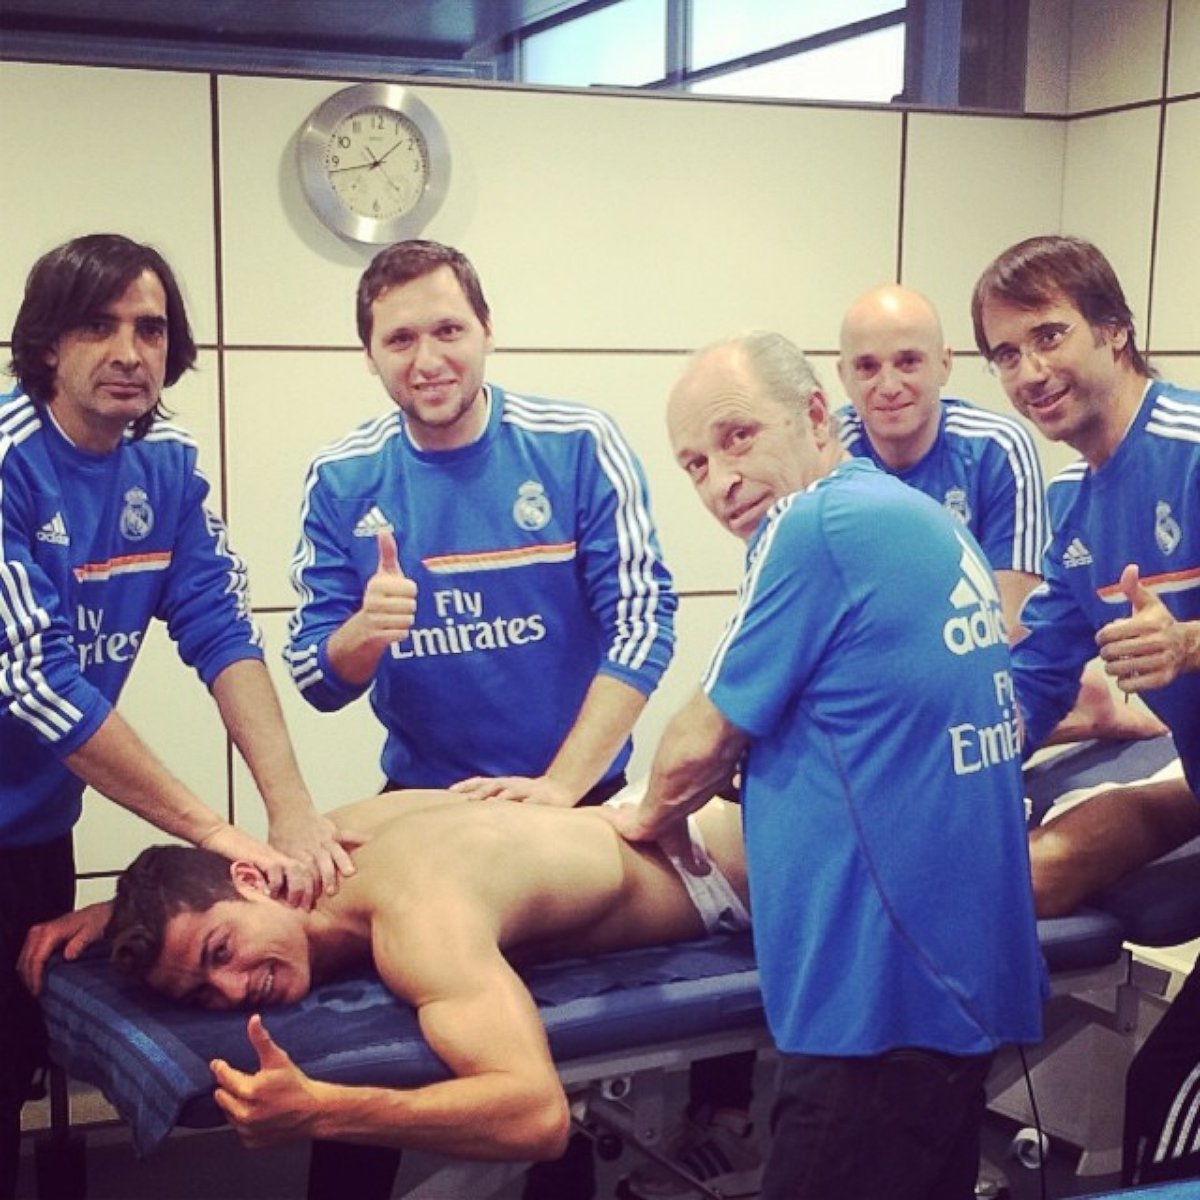 PHOTO: Christano Ronaldo posted this photo to his Instagram, Dec. 31, 2013, with the caption, "Getty ready for next year with the last massage."